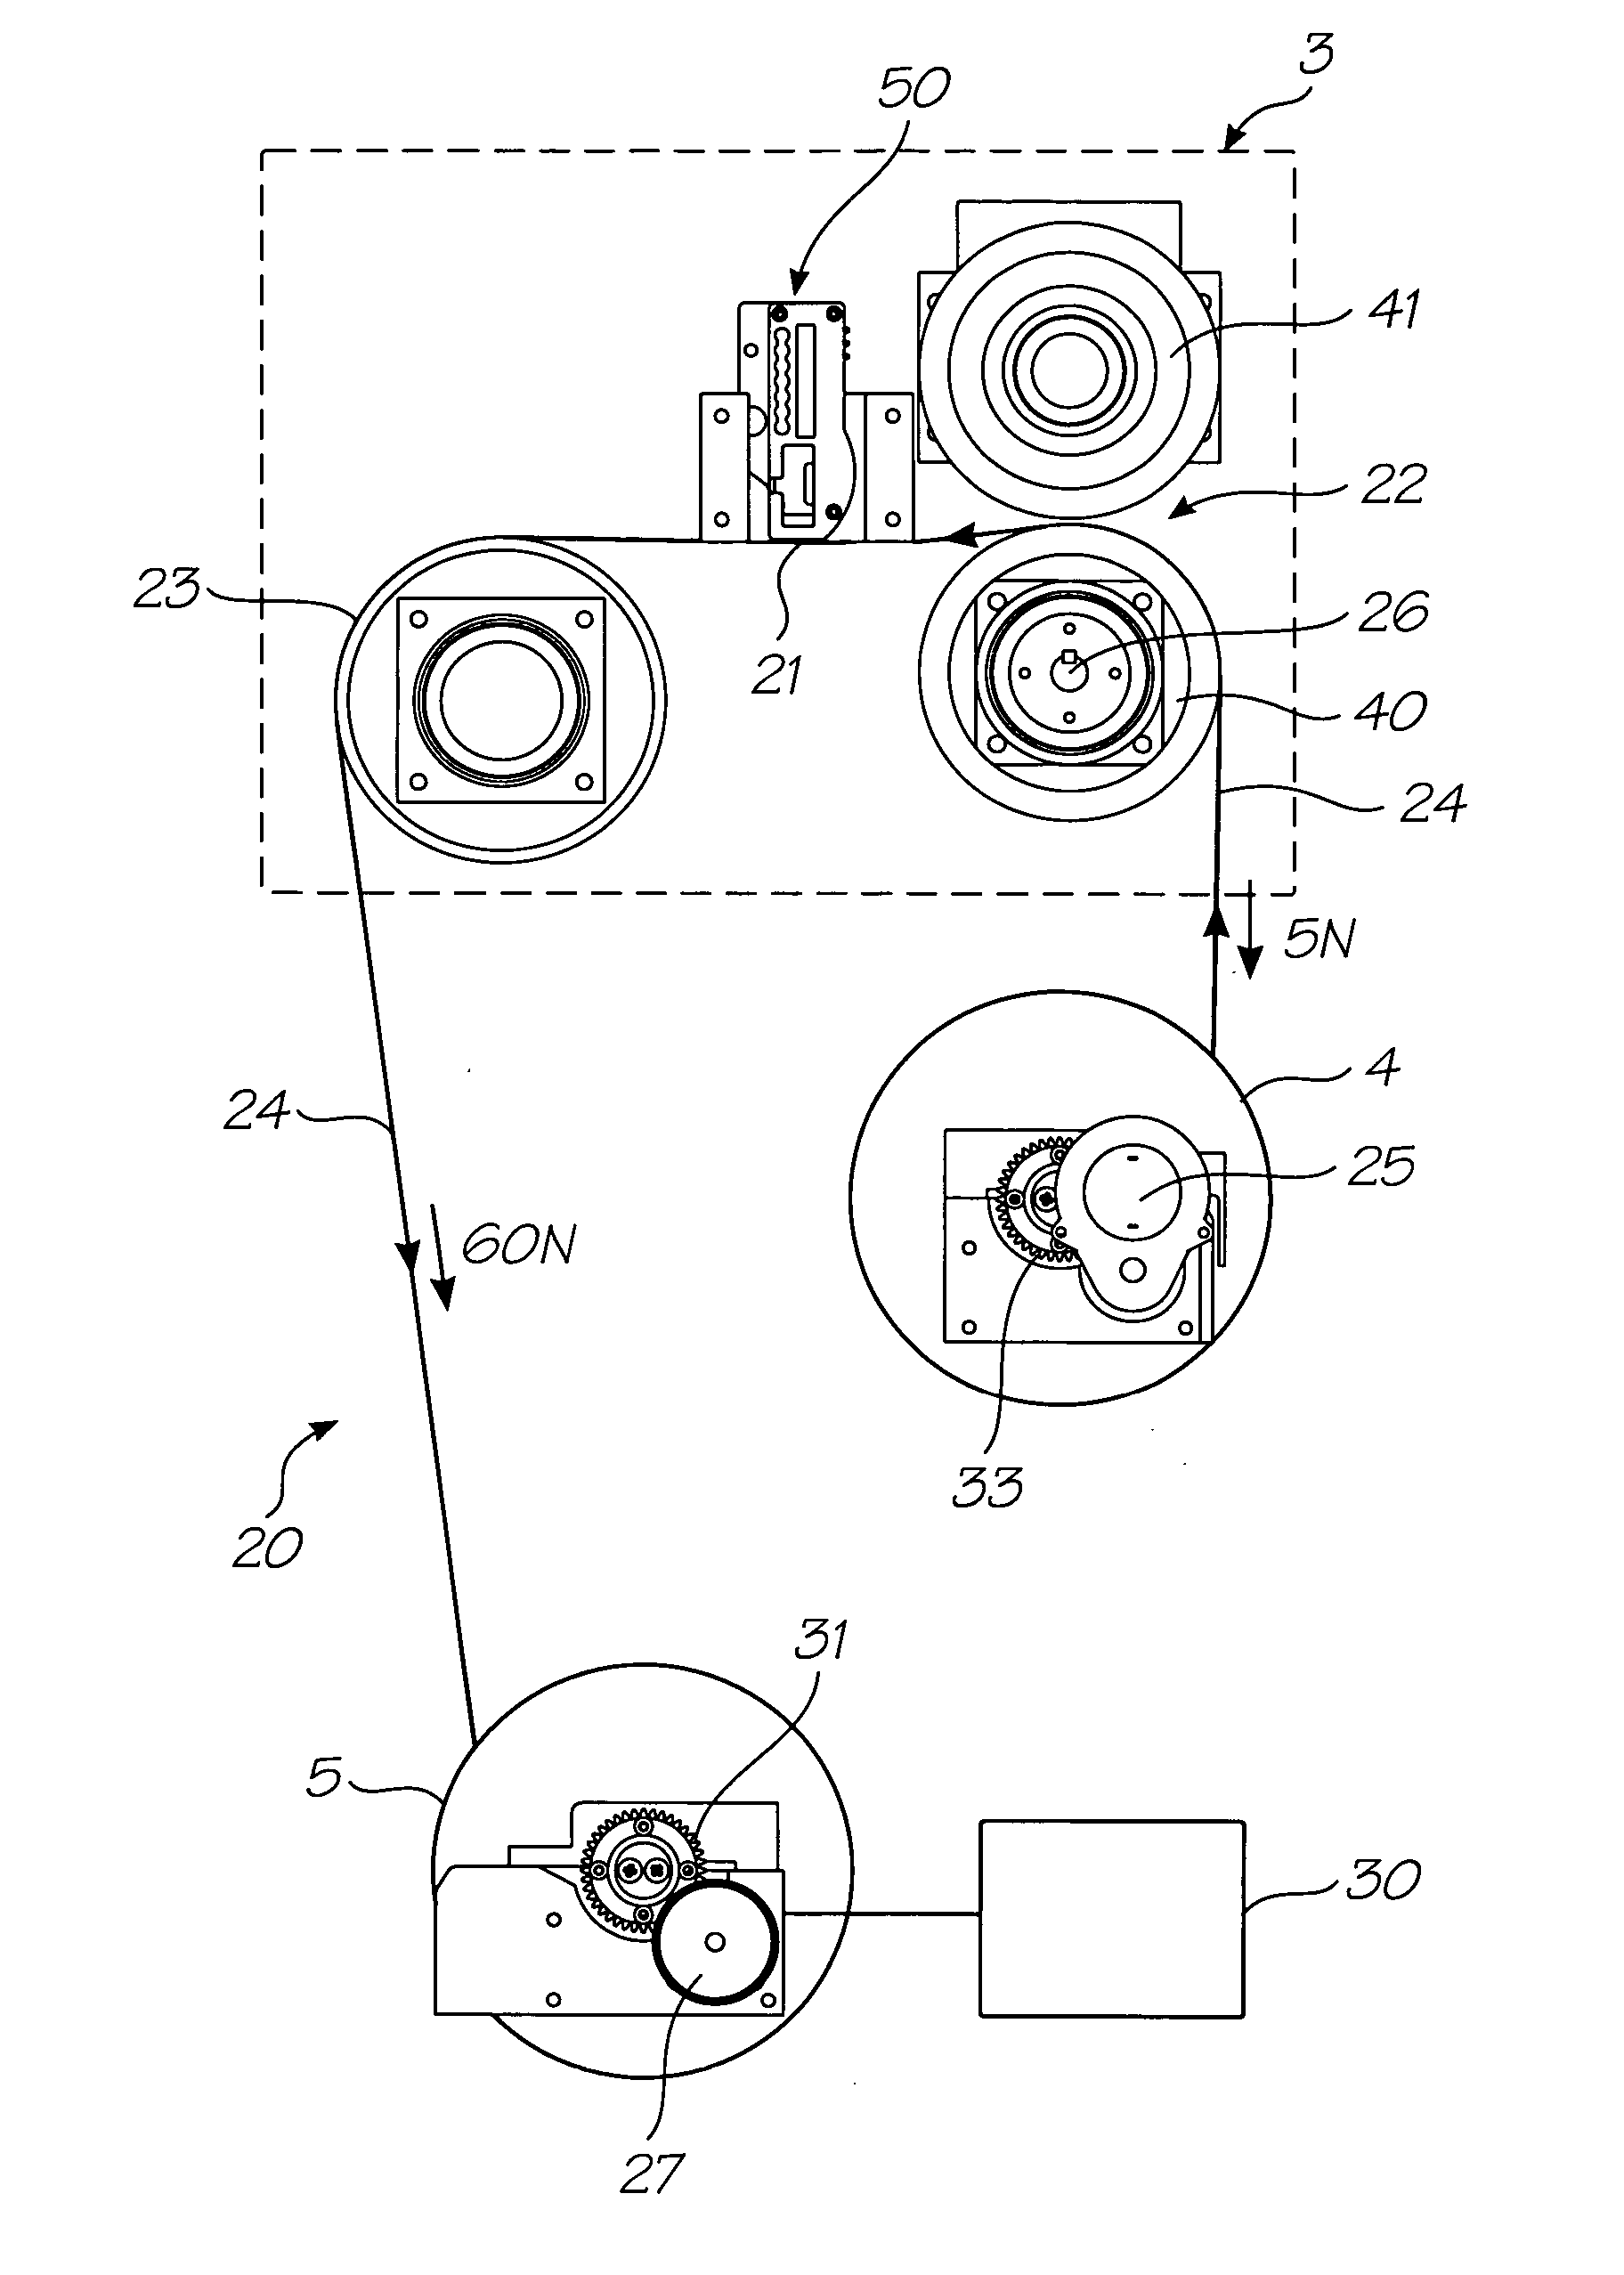 Feed mechanism for maintaining constant web tension in a wide format printer